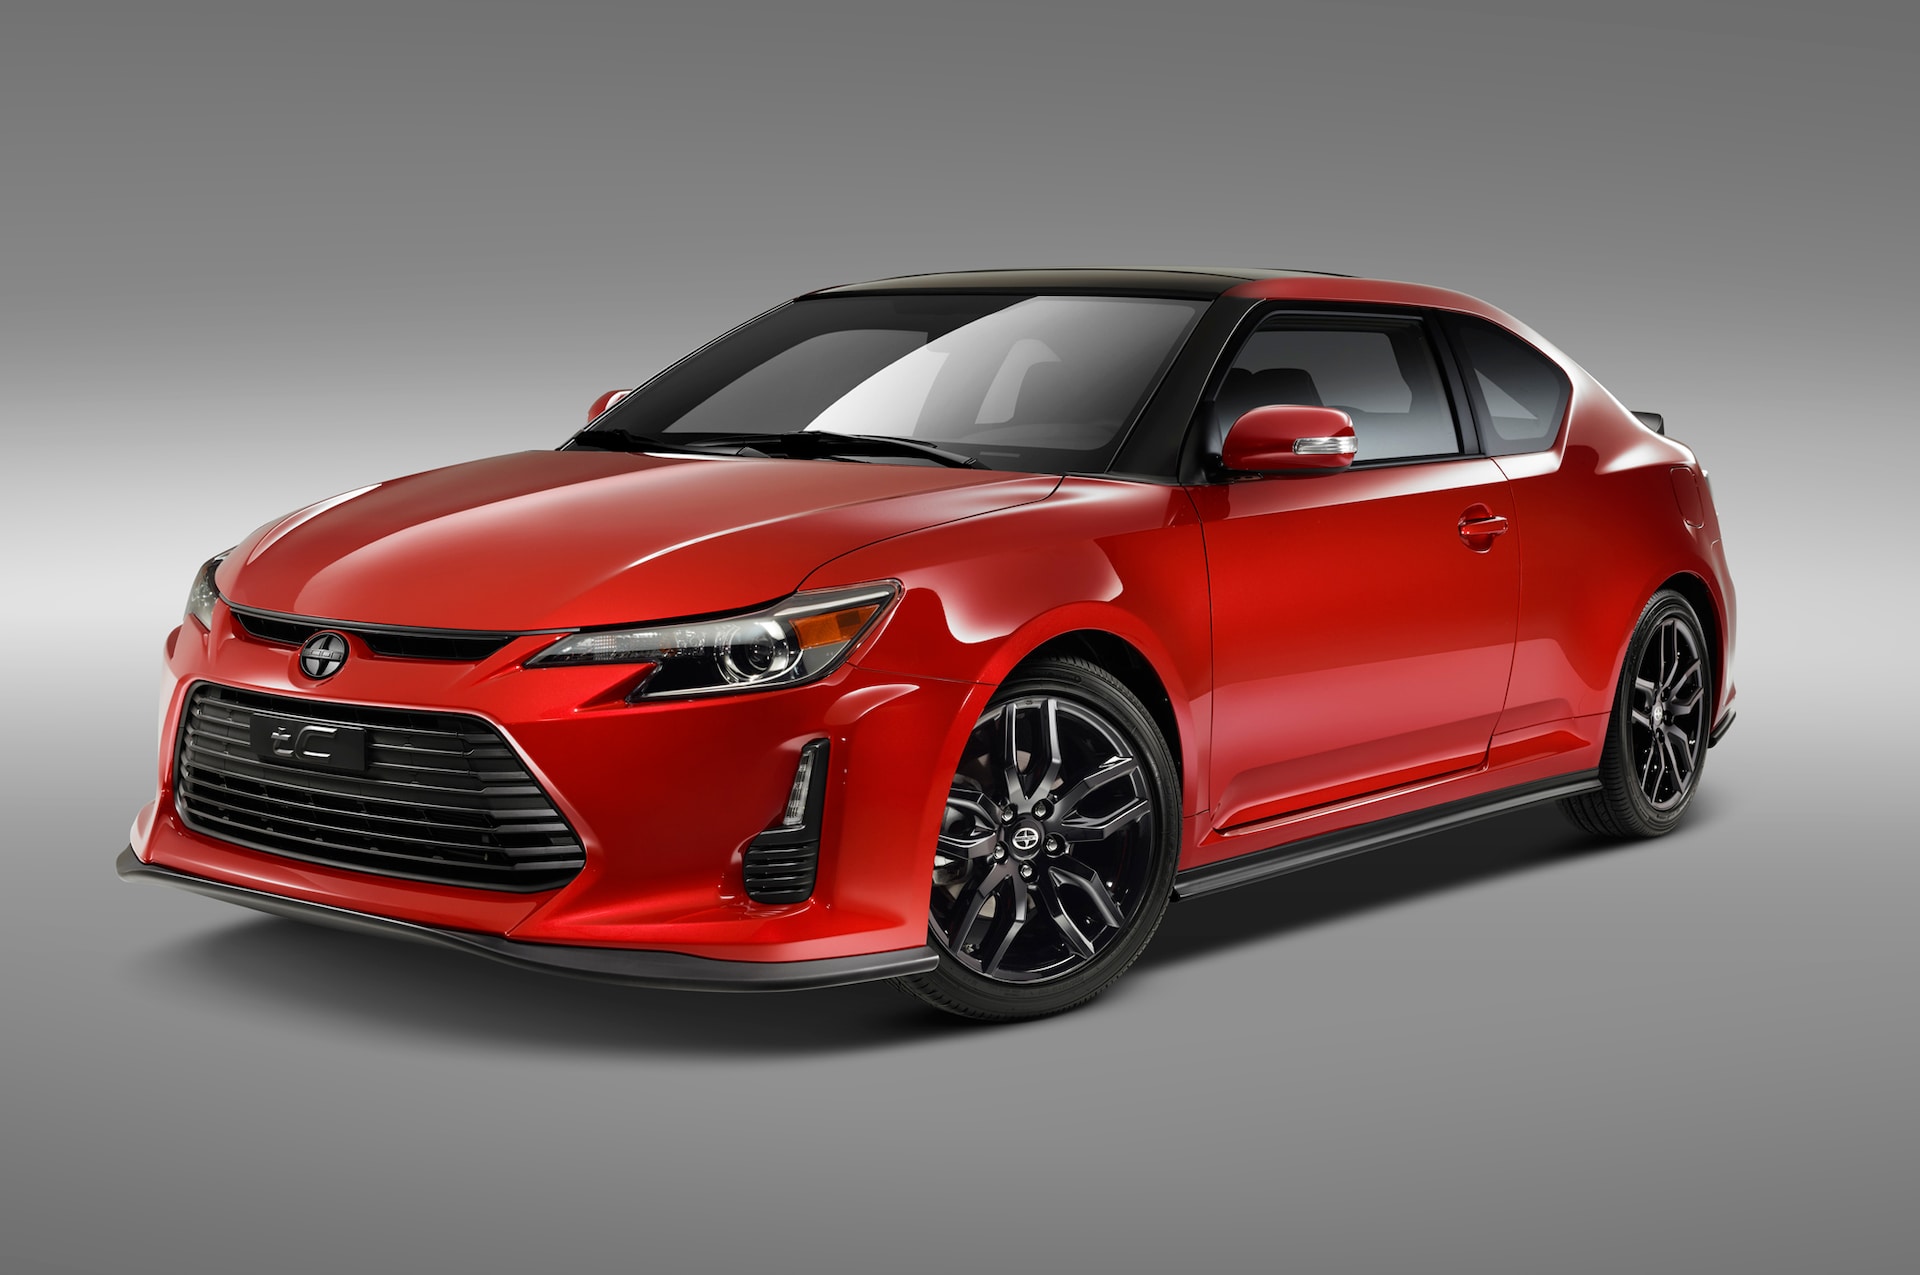 2016 Scion tC Release Series 10.0 Ends the Compact Coupe's Run